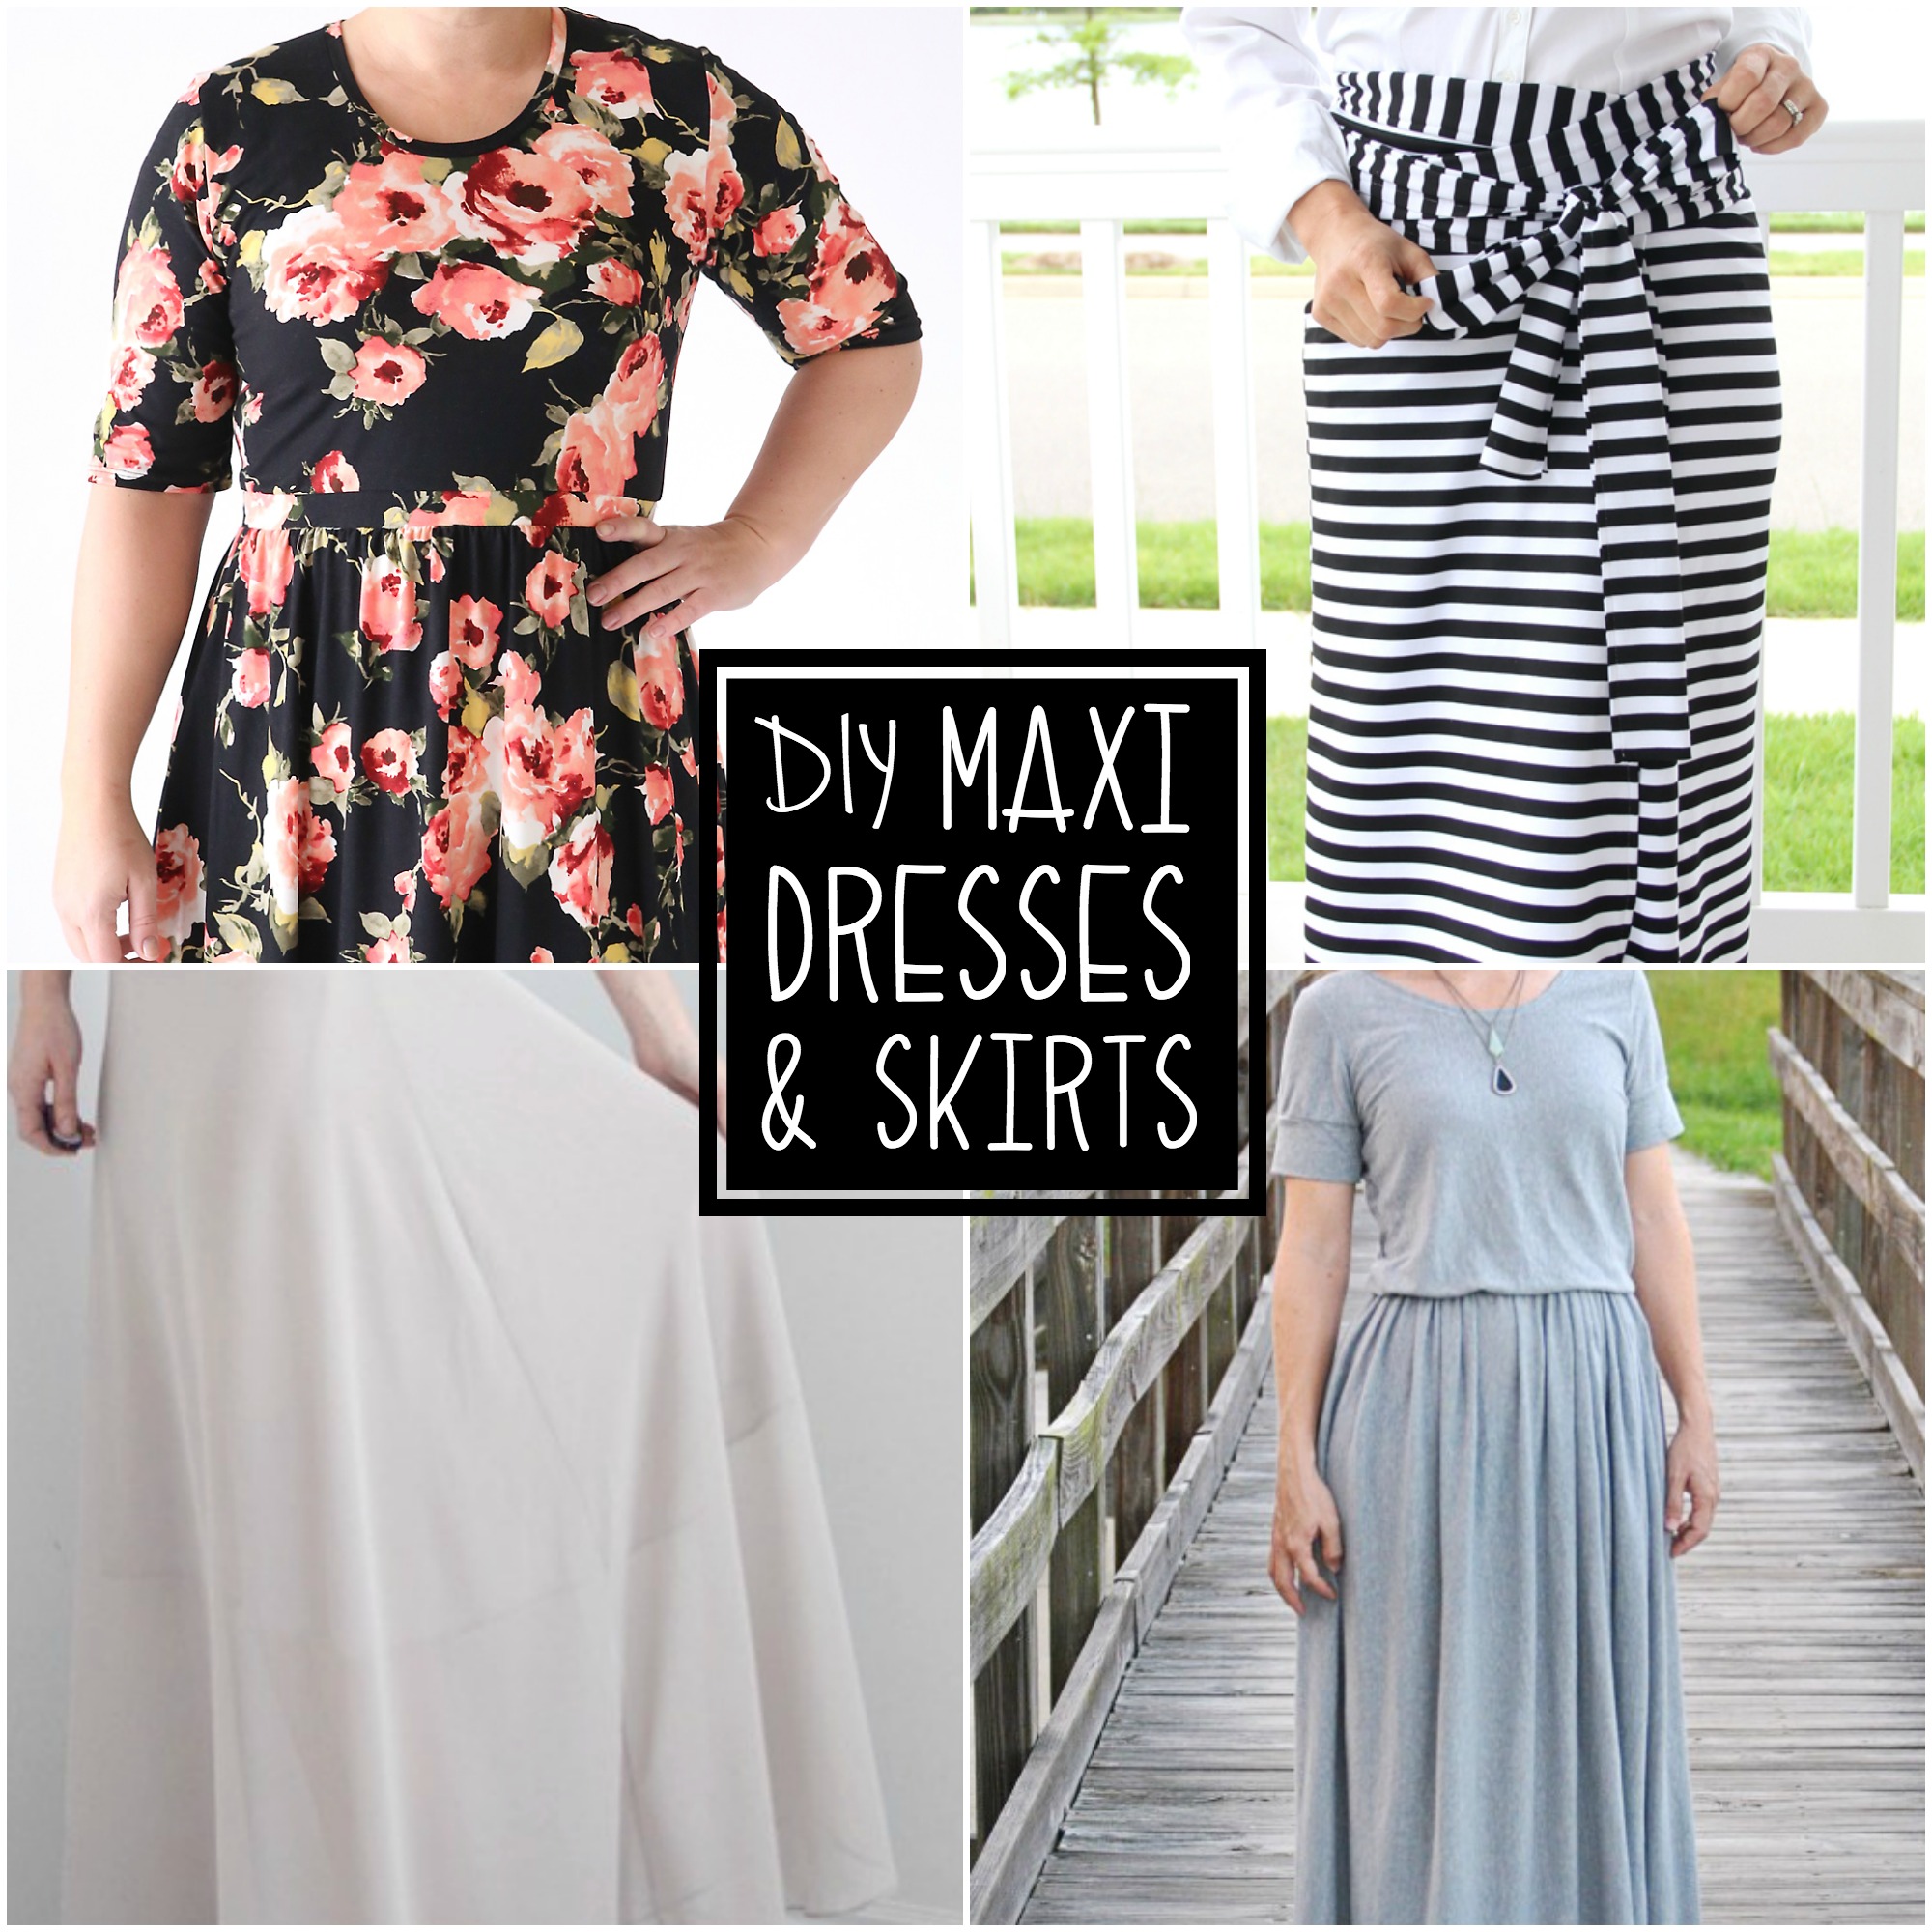 TONS of gorgeous maxi dresses and skirt tutorials! 